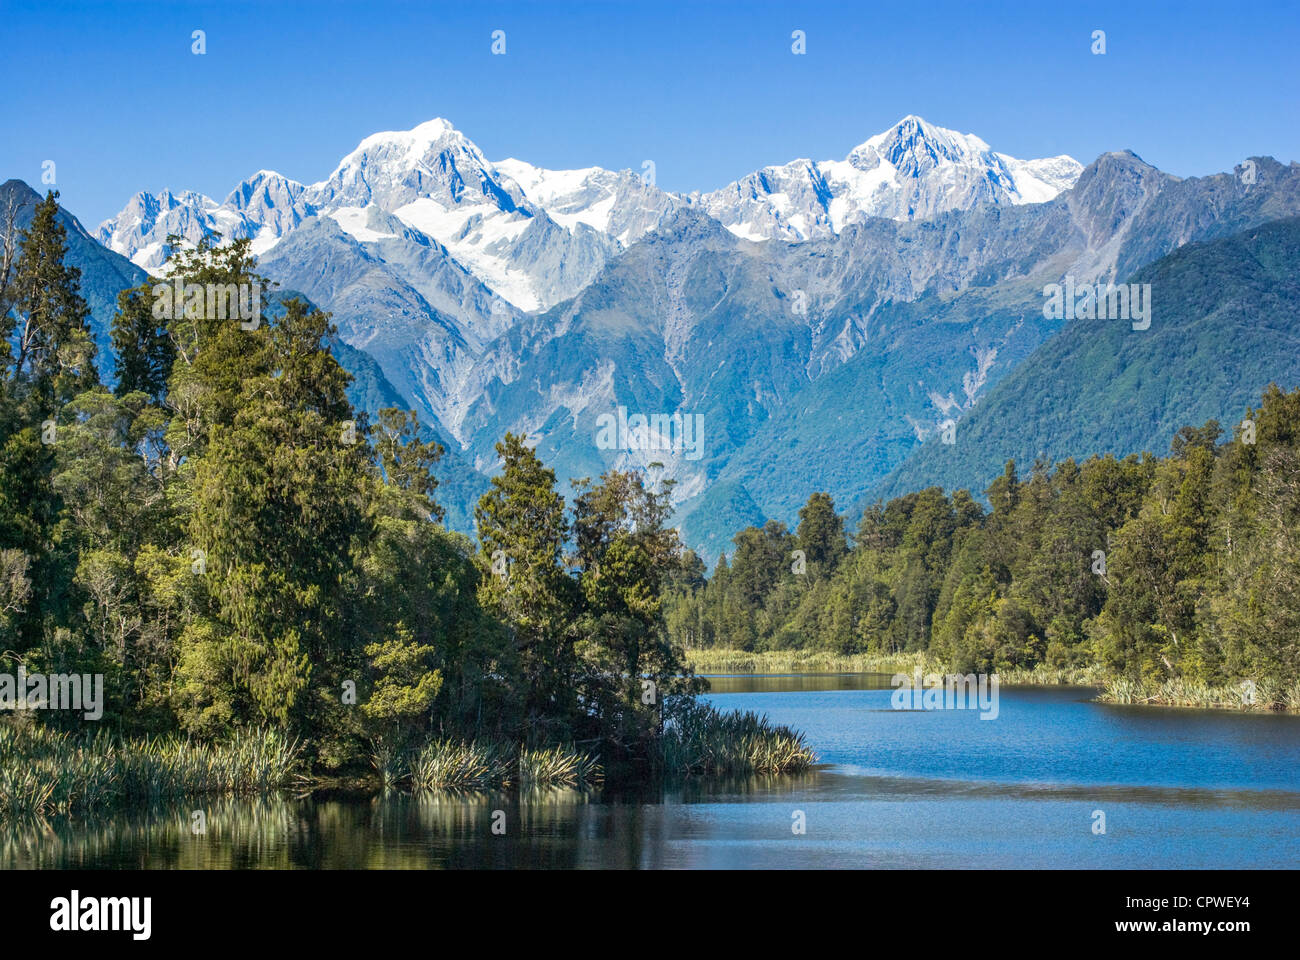 Lake Matheson with snow covered Mount Tasman and Mount Cook, New Zealand's highest mountain. Mount Cook is on the right. Stock Photo